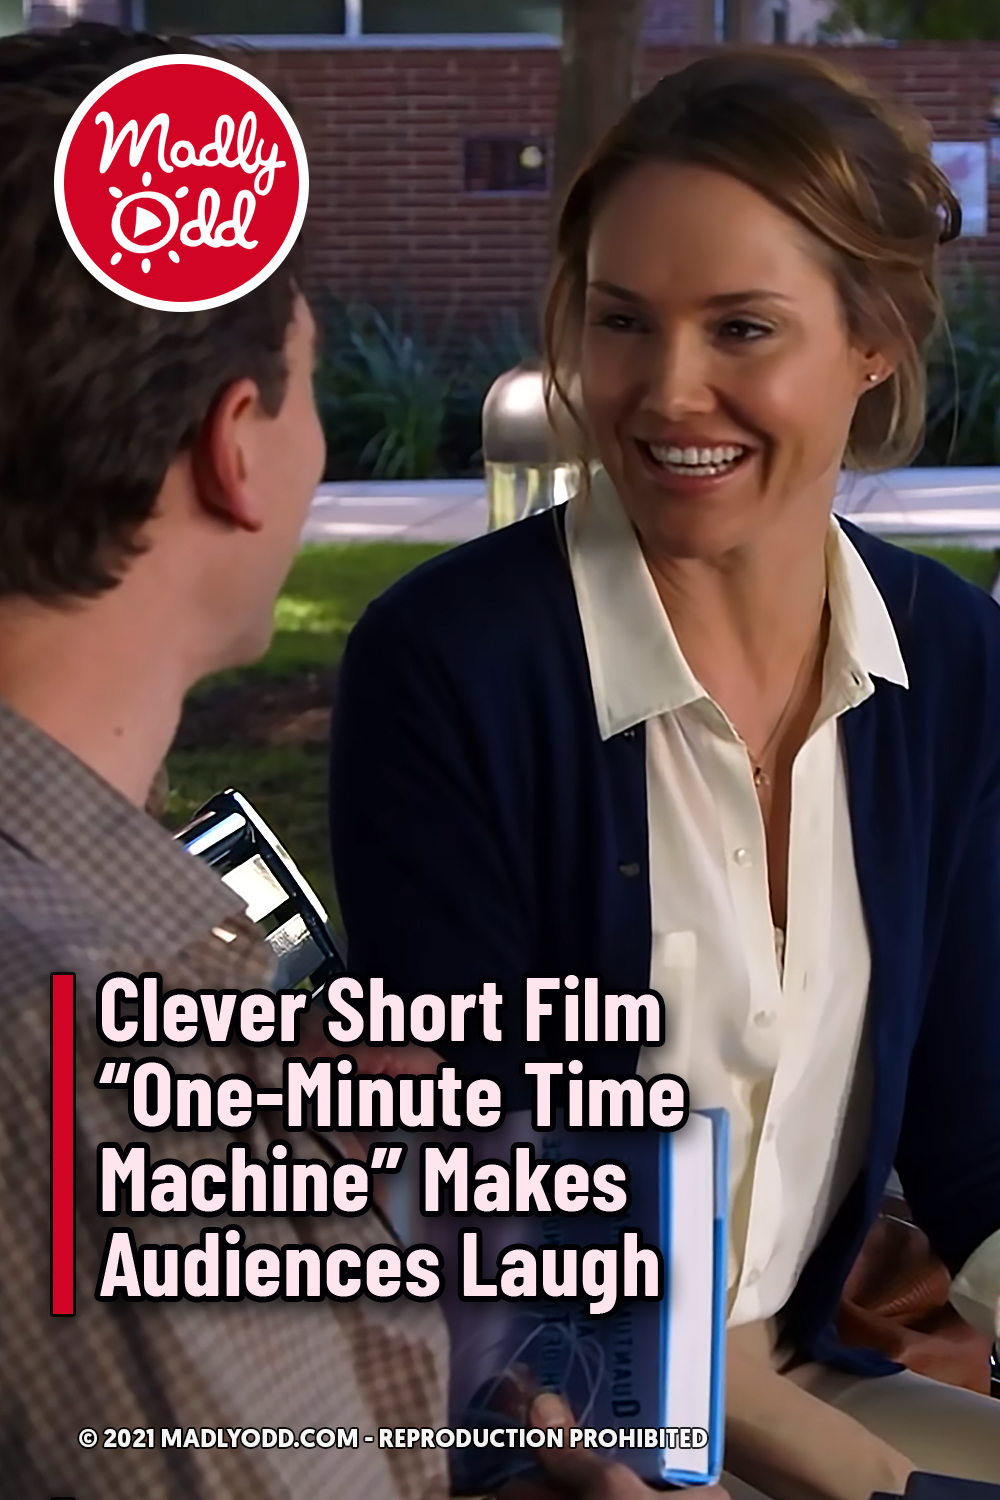 Clever Short Film “One-Minute Time Machine” Makes Audiences Laugh